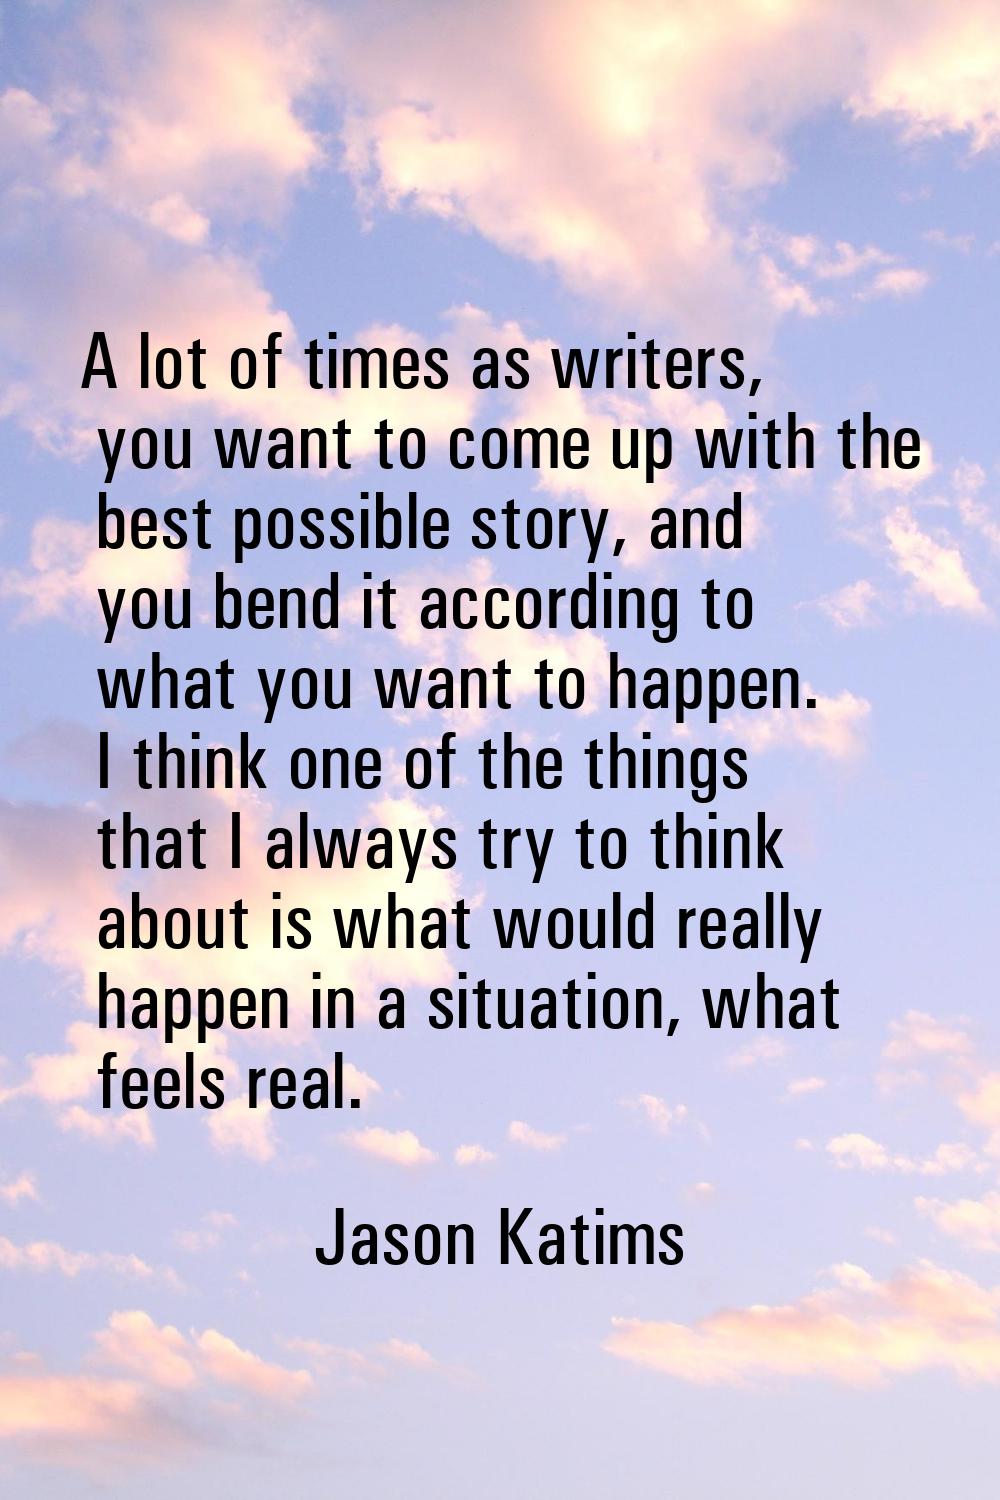 A lot of times as writers, you want to come up with the best possible story, and you bend it accord